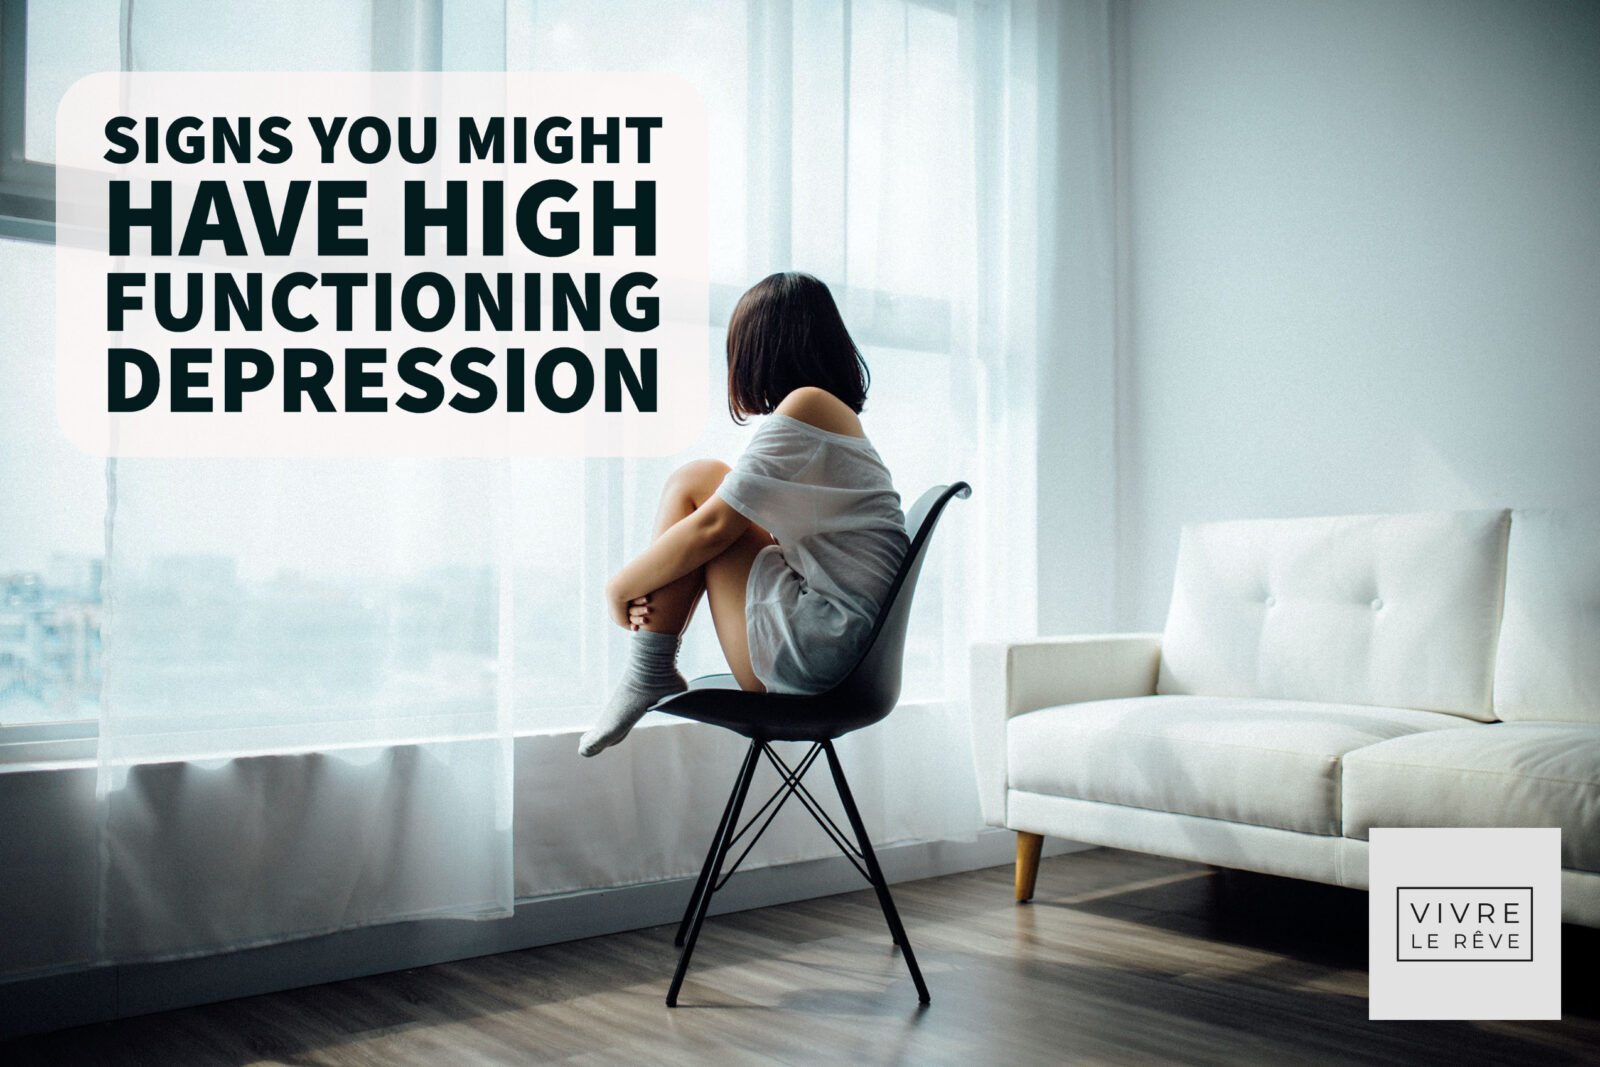 Signs You Might Have High Functioning Depression